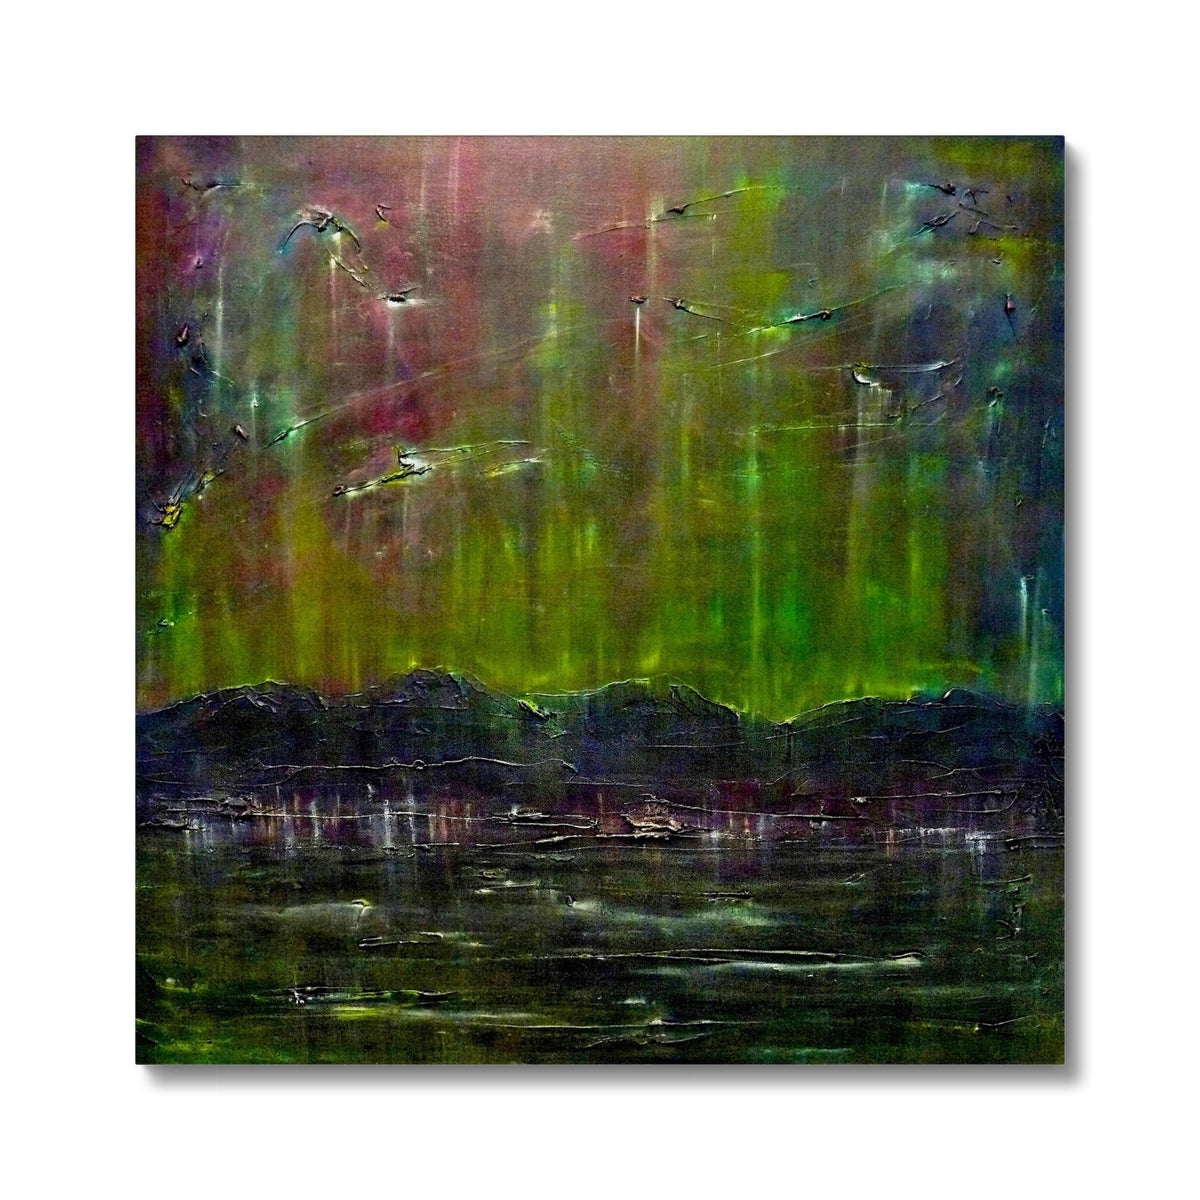 Cromarty Harbour Northern Lights Painting | Canvas From Scotland-Contemporary Stretched Canvas Prints-Scottish Highlands & Lowlands Art Gallery-24"x24"-Paintings, Prints, Homeware, Art Gifts From Scotland By Scottish Artist Kevin Hunter